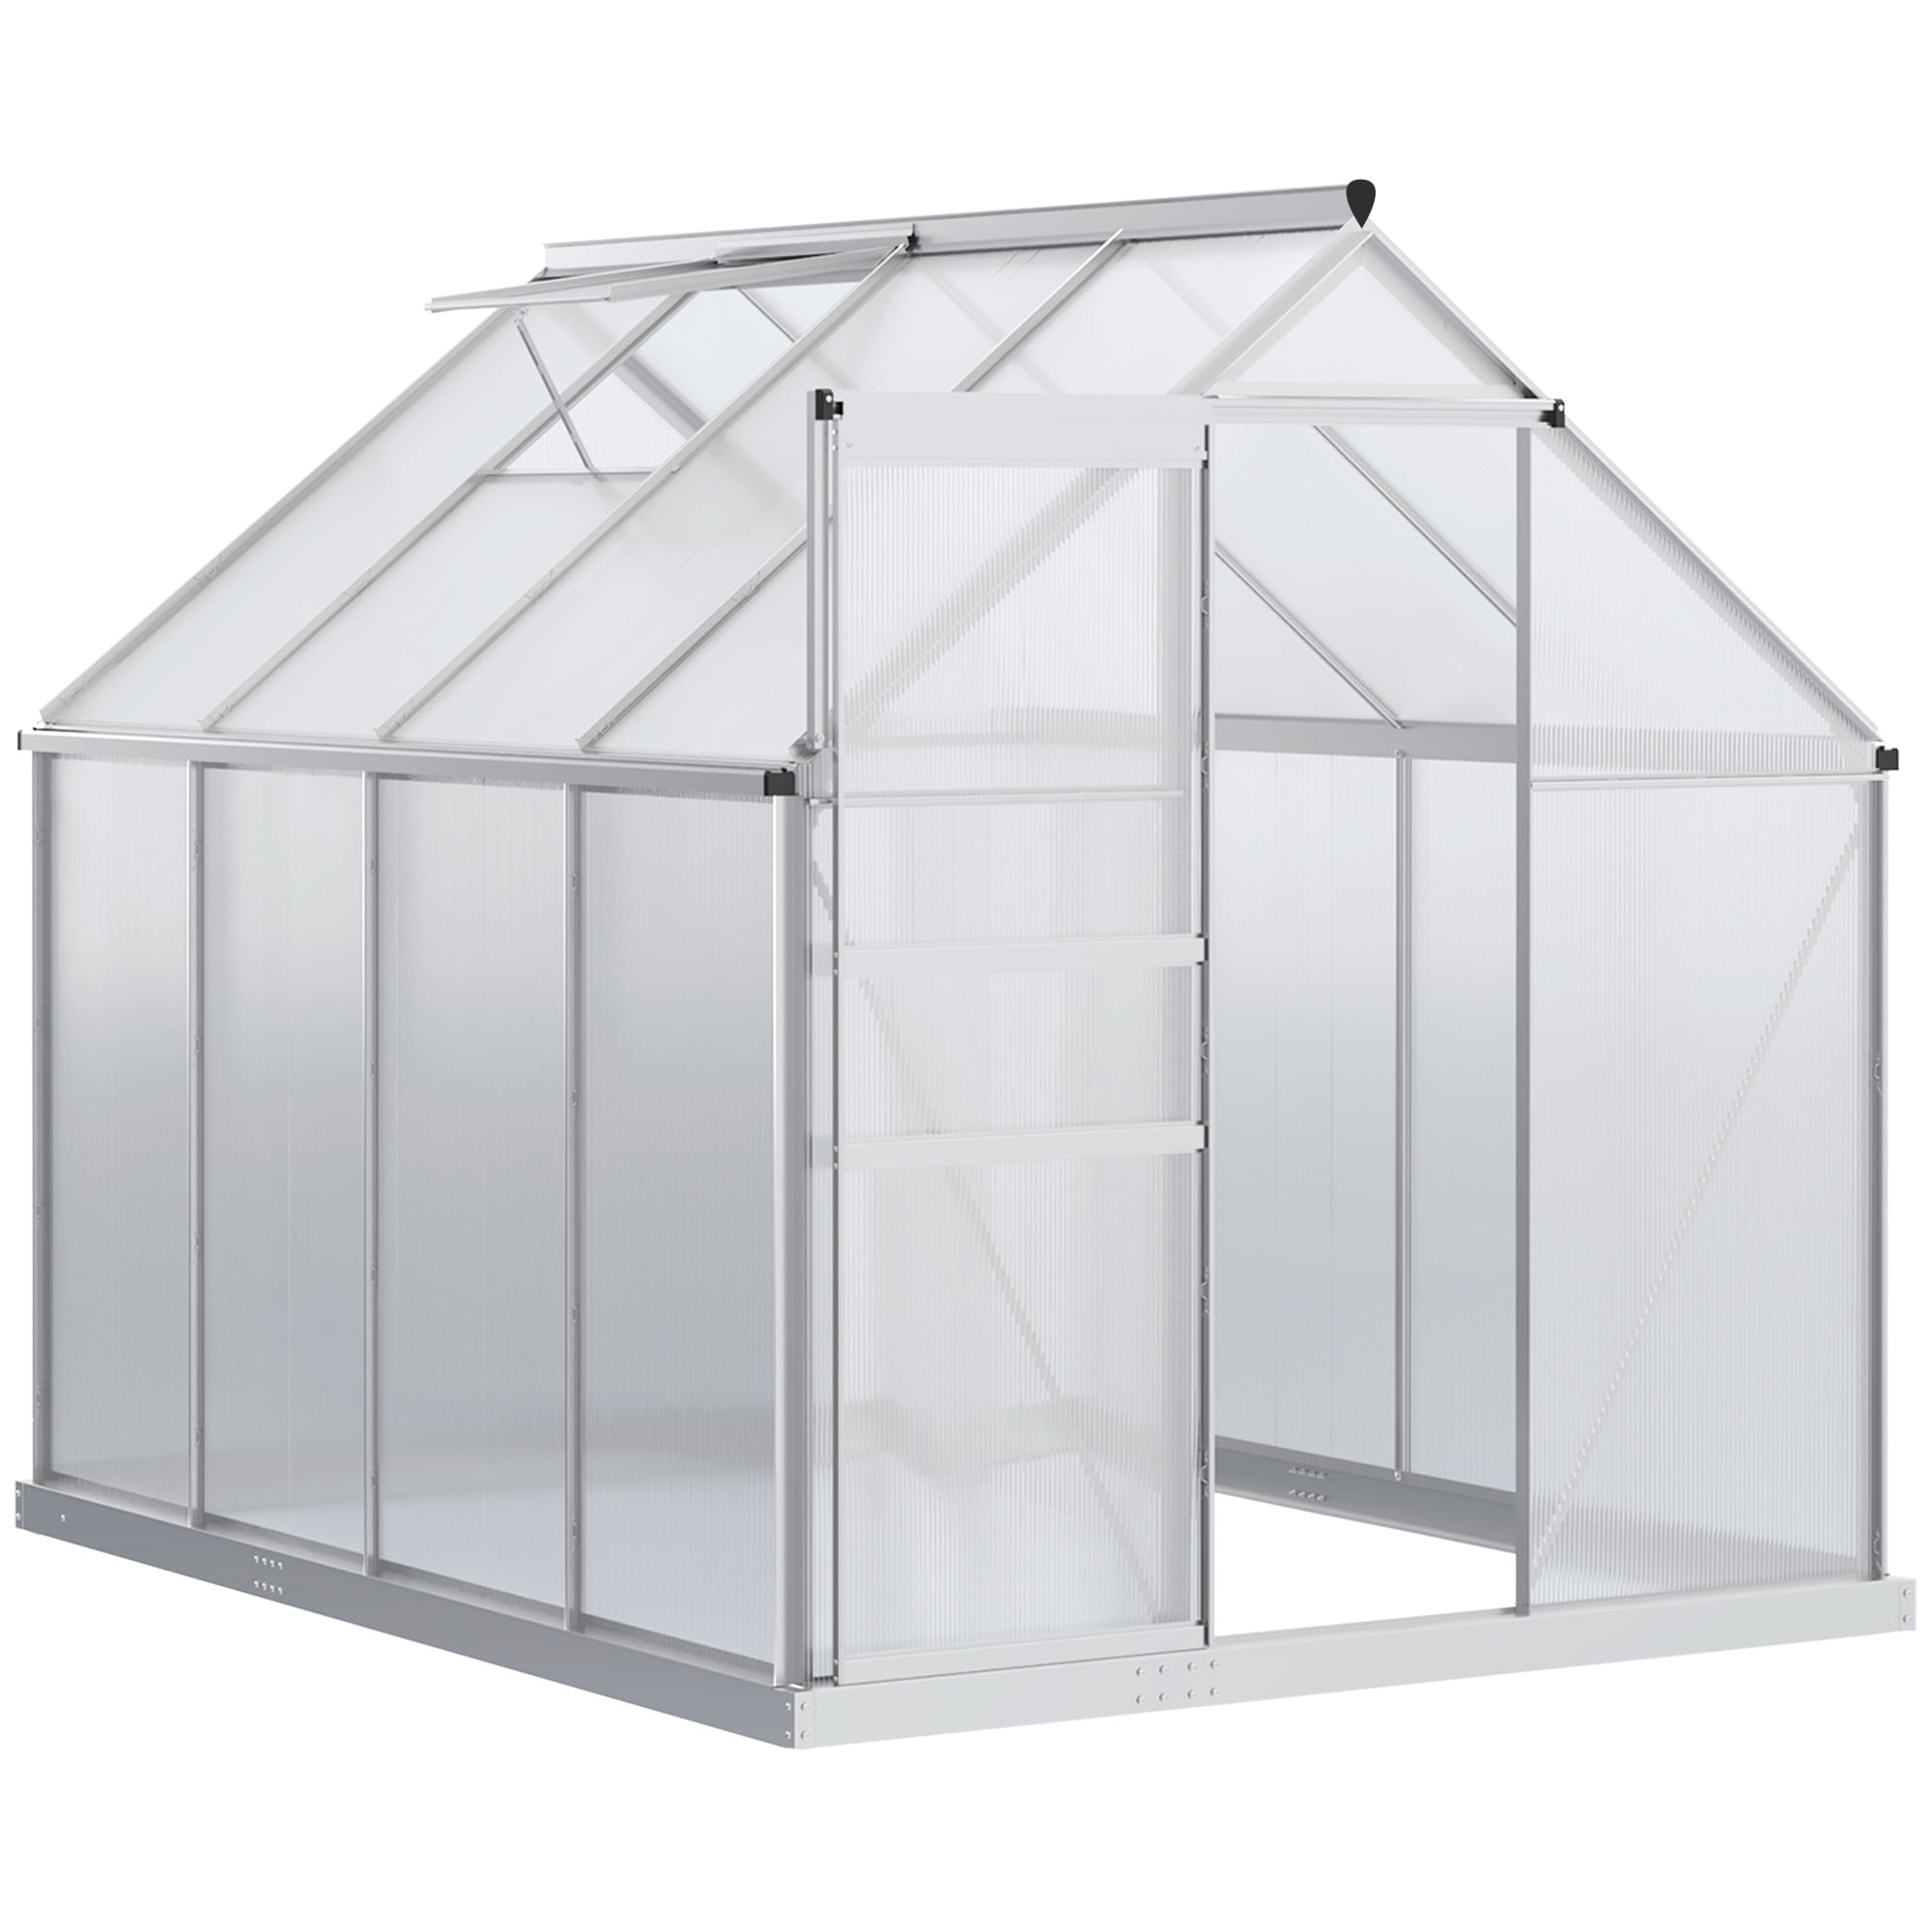 Rain Gutter Outdoor Greenhouse Sliding Door 6’ x 6’ x7’ Garden Greenhouse w/Adjustable Roof Vent Walk-in Polycarbonate Greenhouse Kit with Aluminum Frame for Winter 